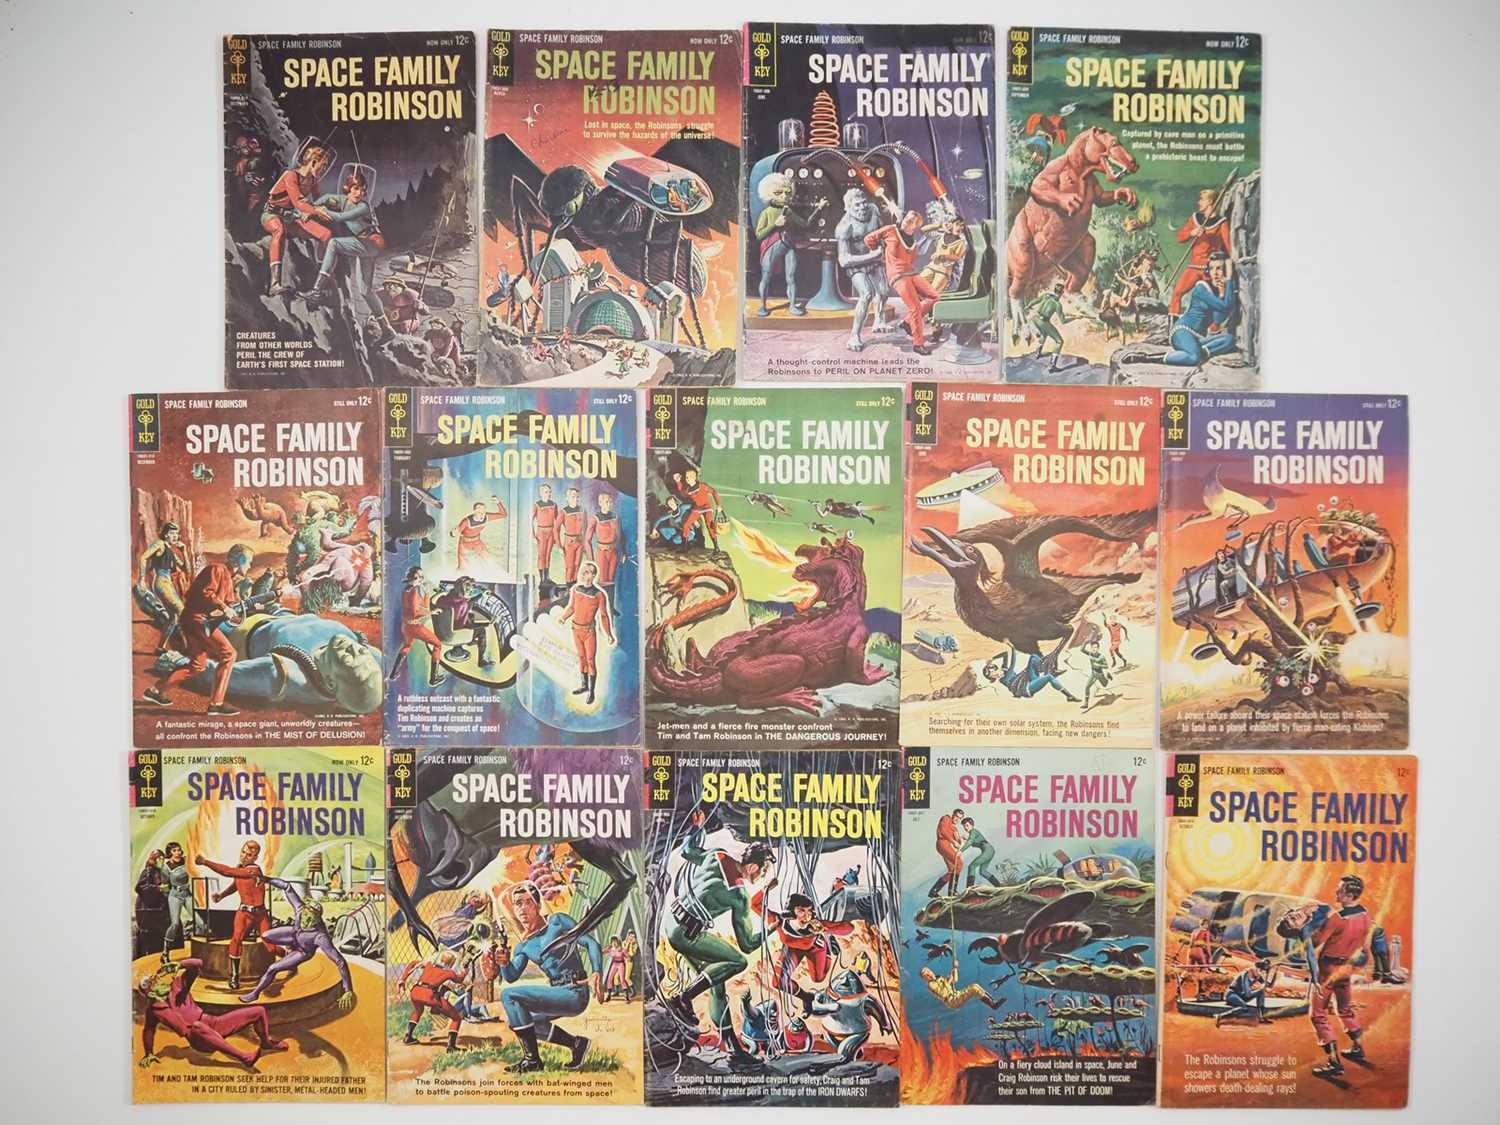 SPACE FAMILY ROBINSON #1, 2, 3, 4, 5, 6, 7, 8, 9, 10, 11, 12, 13, 14 (14 in Lot) - (1962/1965 - GOLD